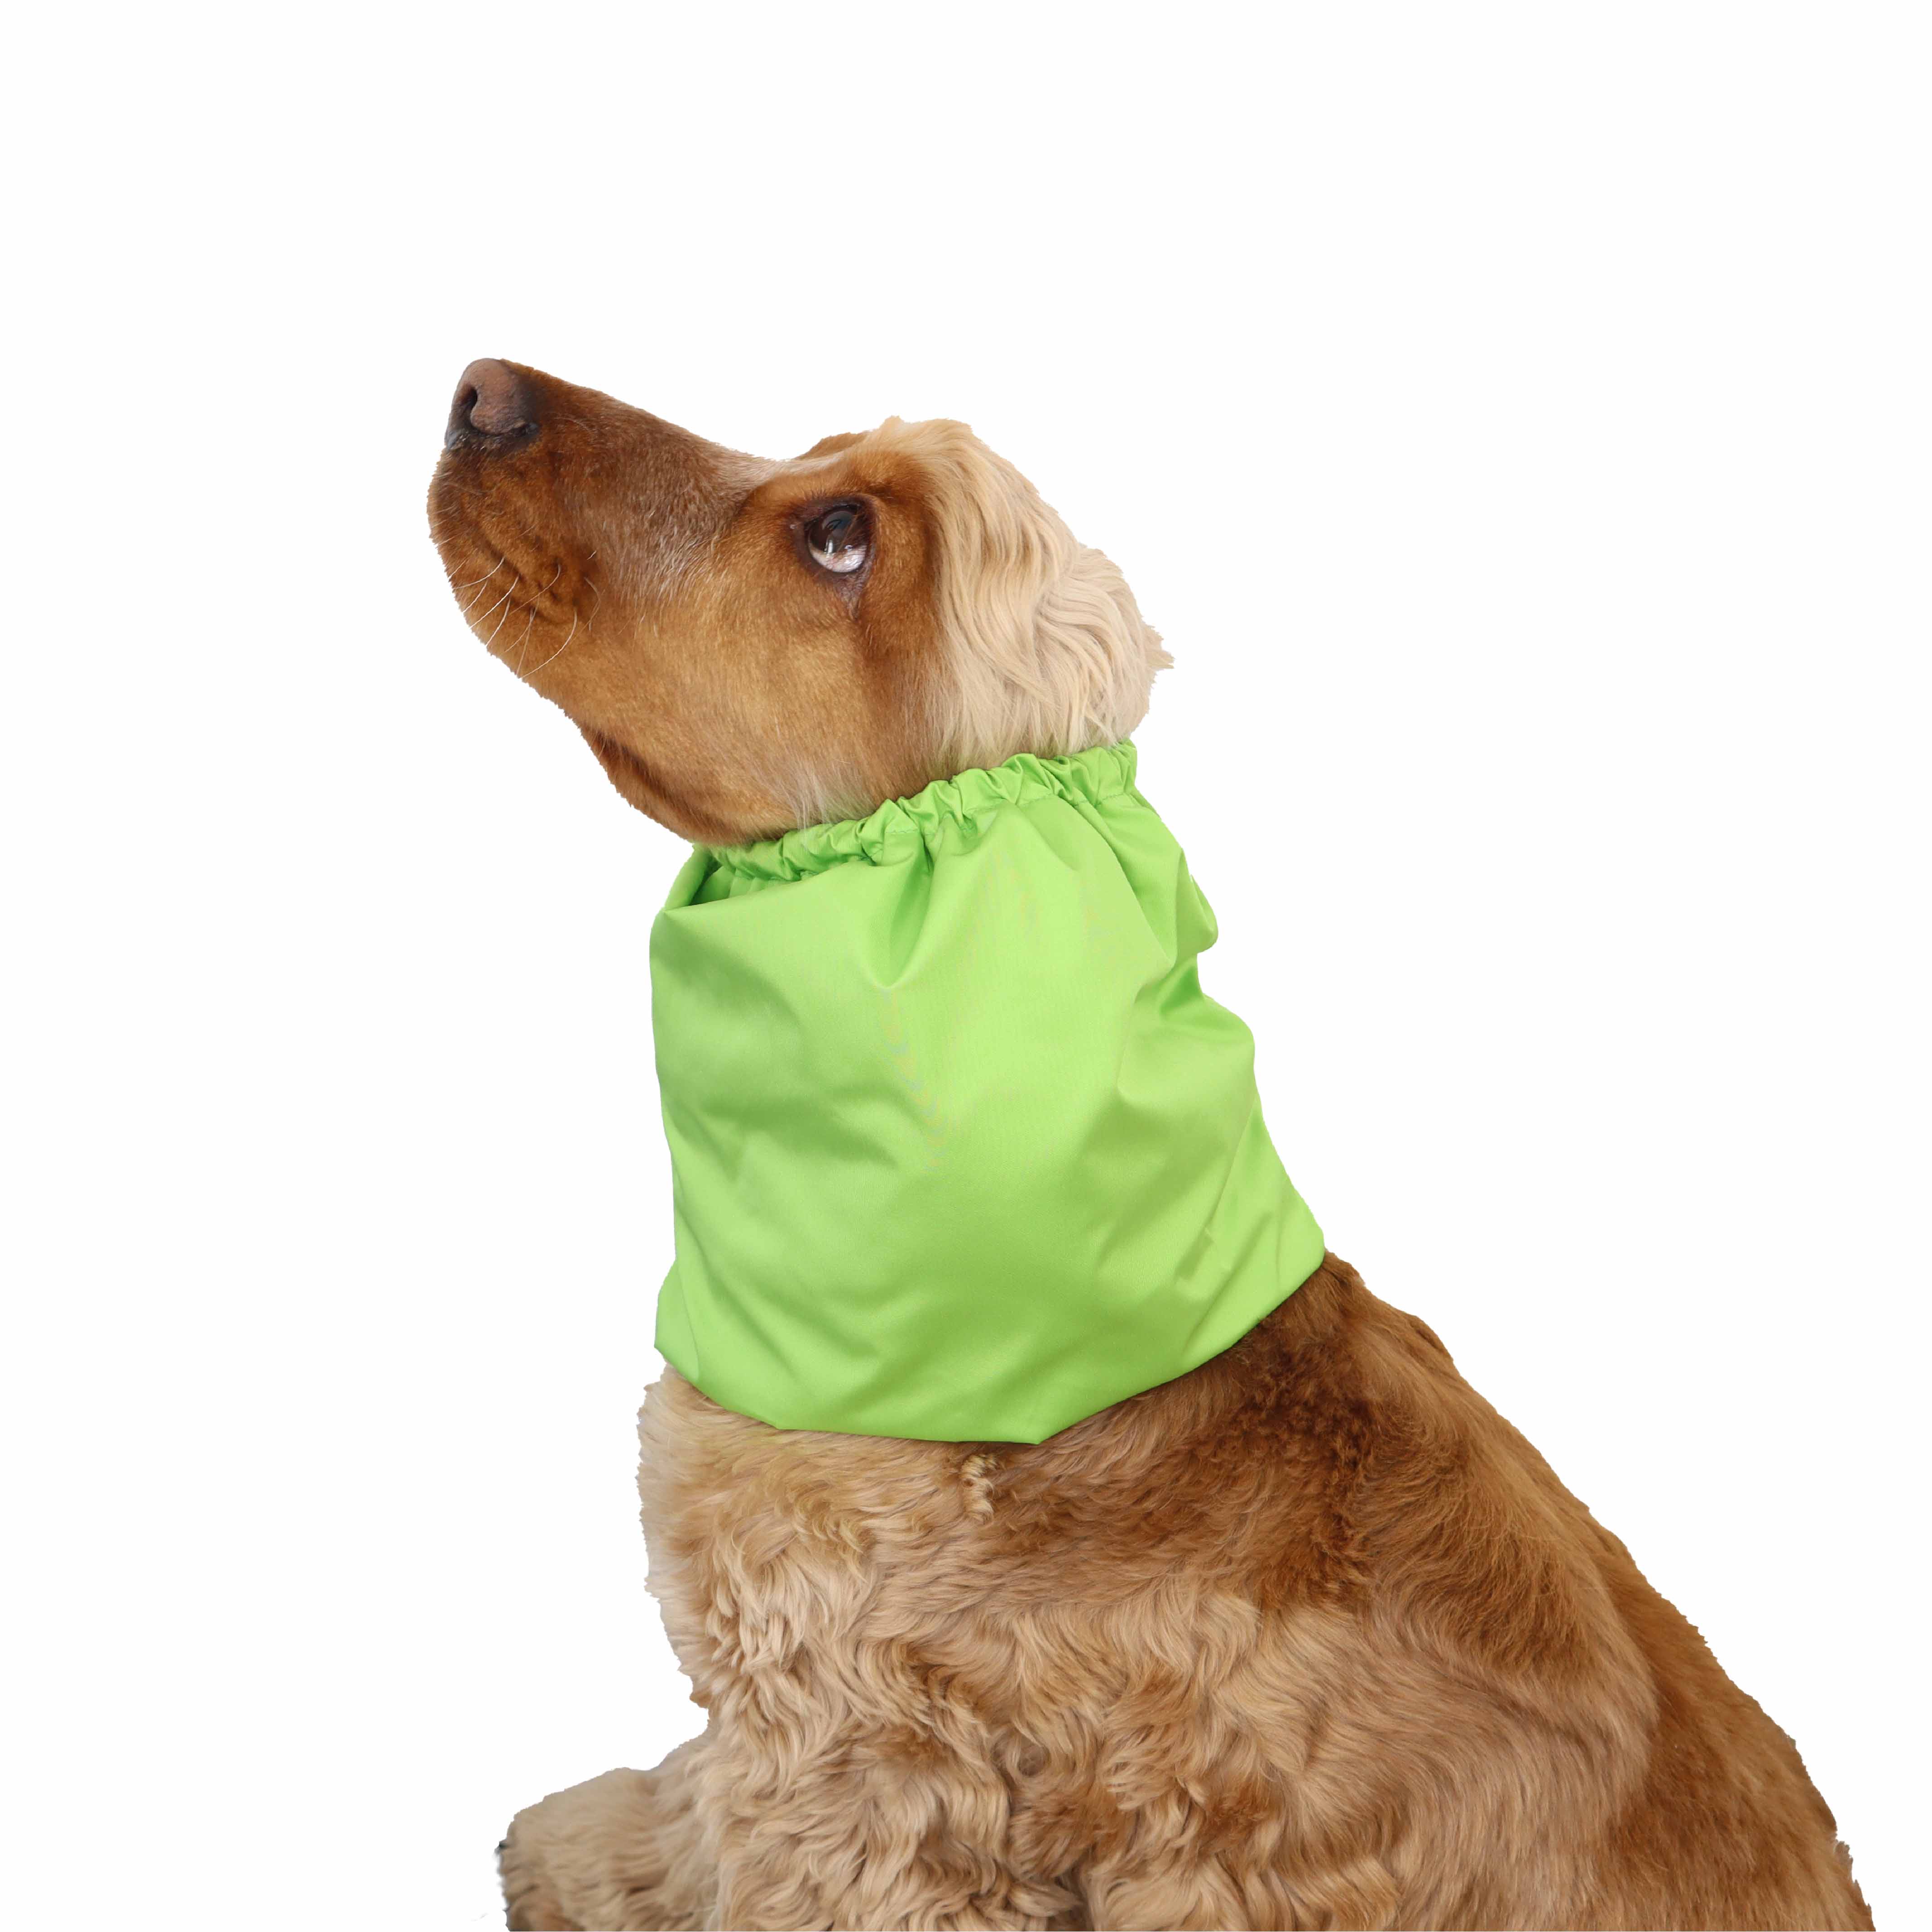 Dog with green ear protector from Distinguish Me